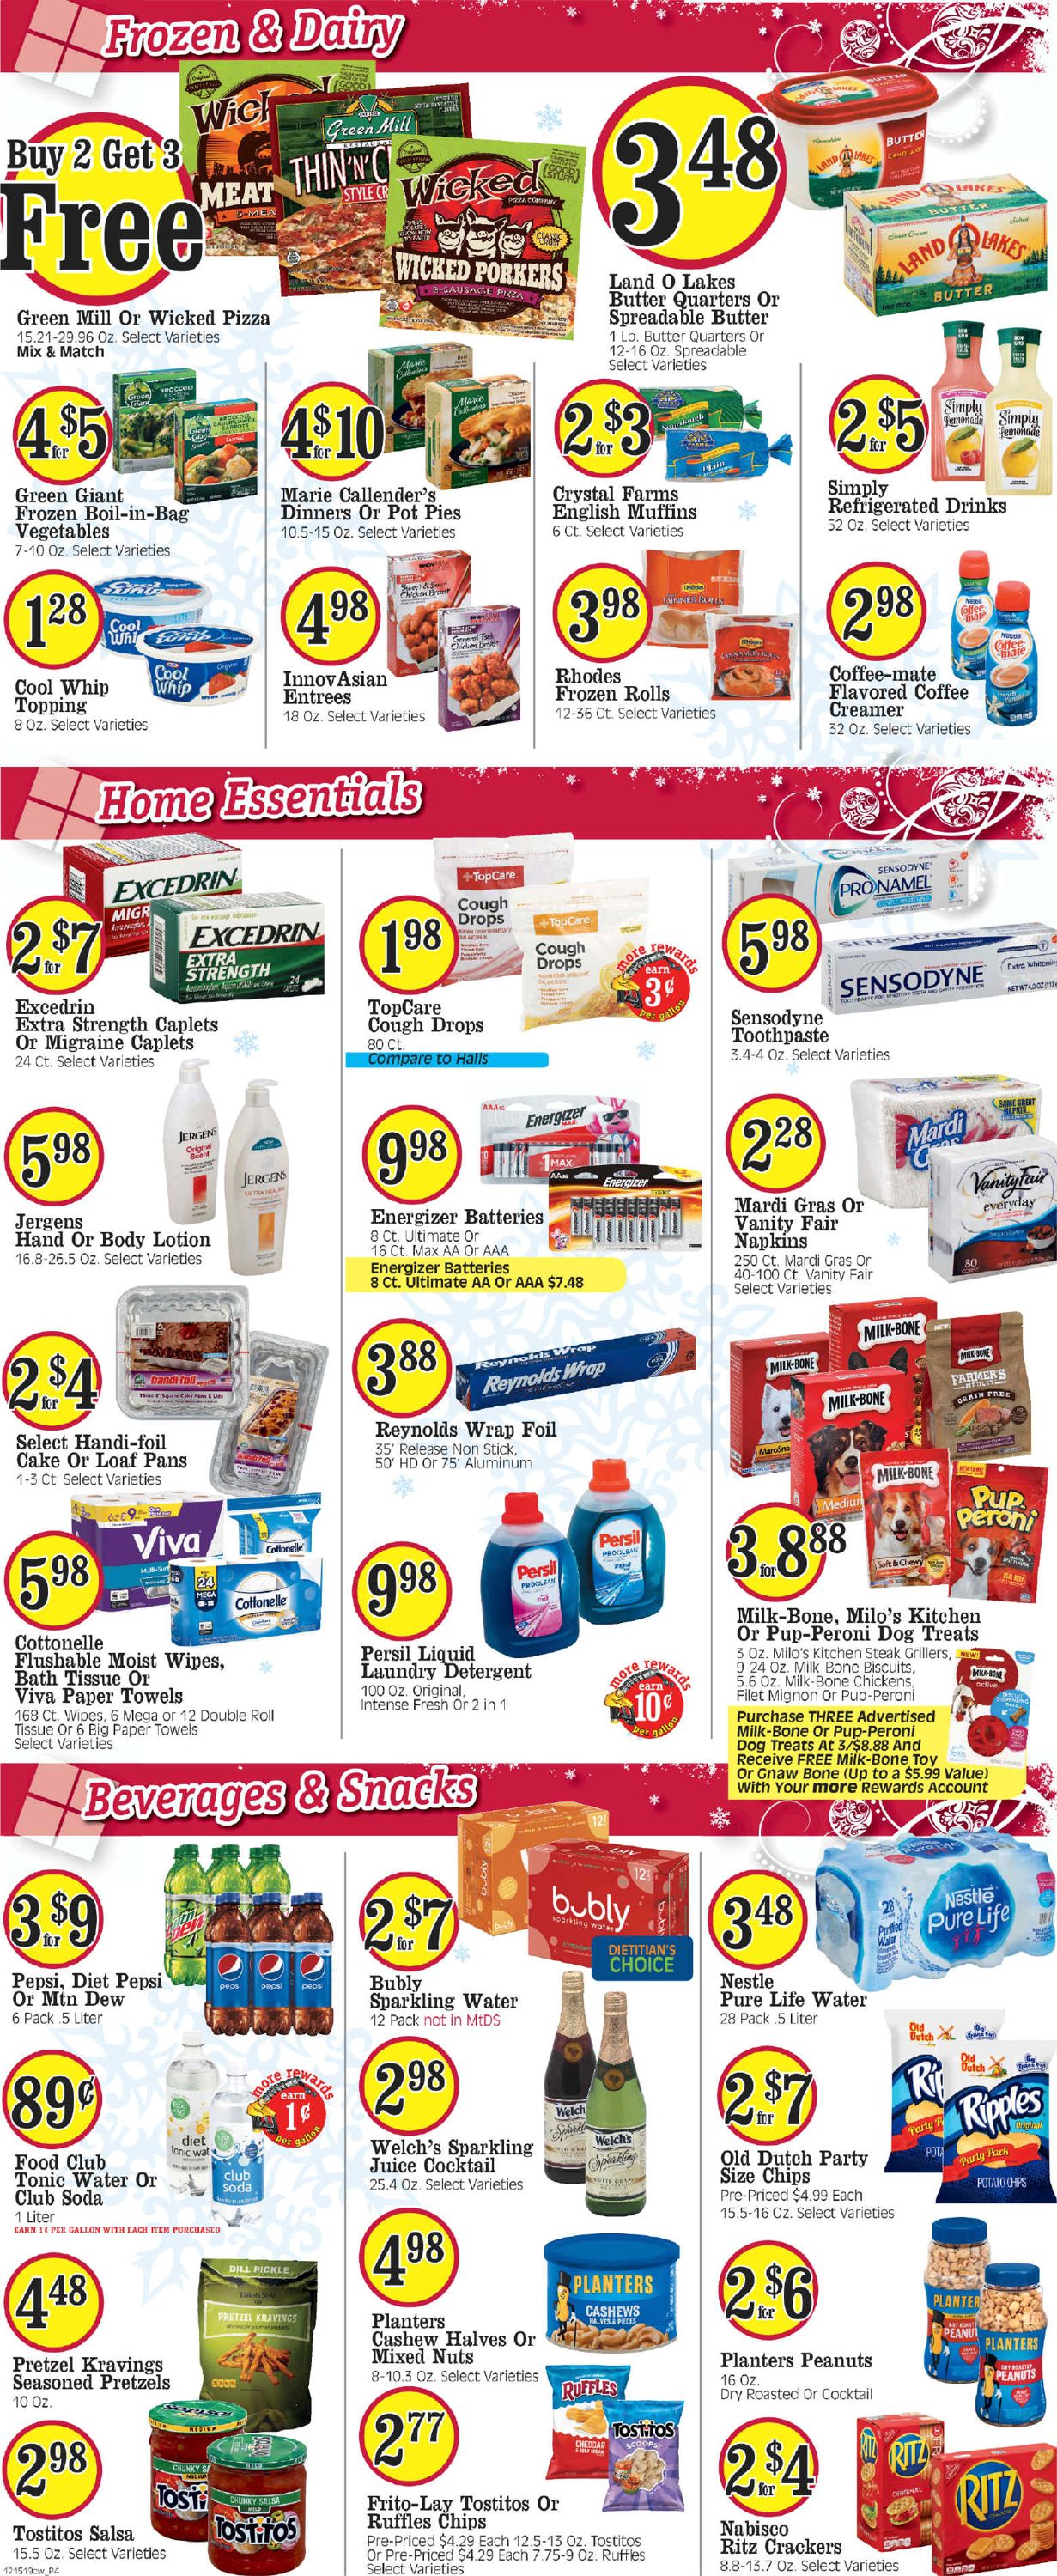 Cash Wise Weekly Ad Circular - valid 12/15-12/21/2019 (Page 4)